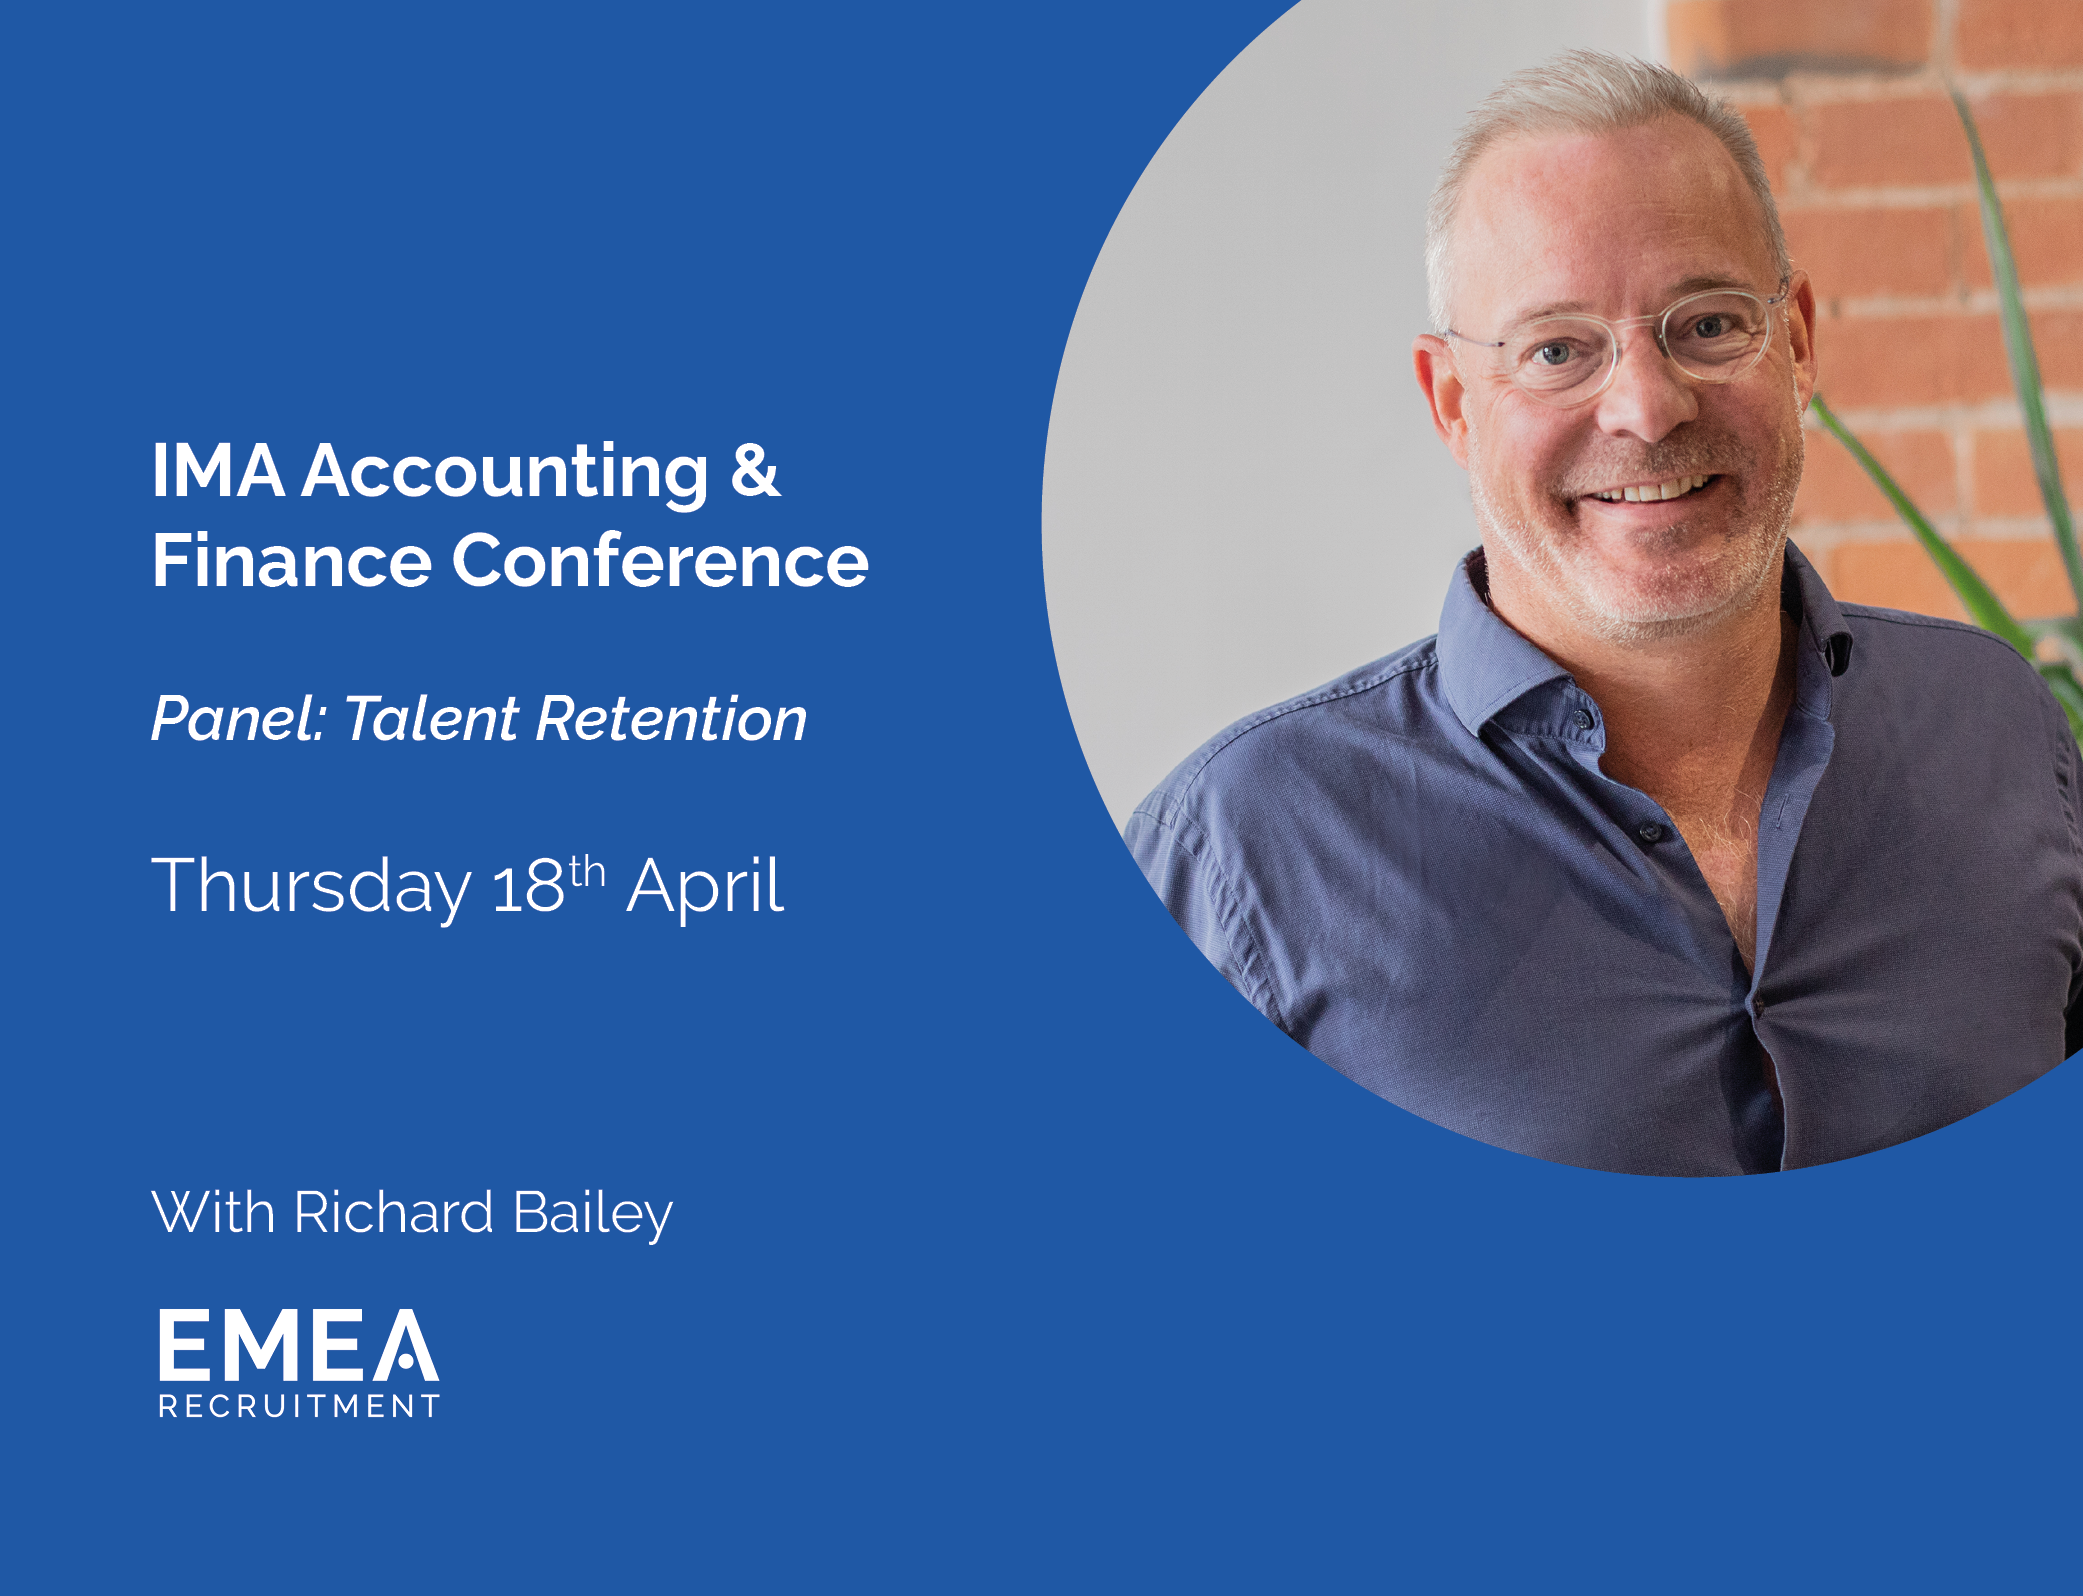 Discussing Talent Retention at the IMA Accounting & Finance Conference